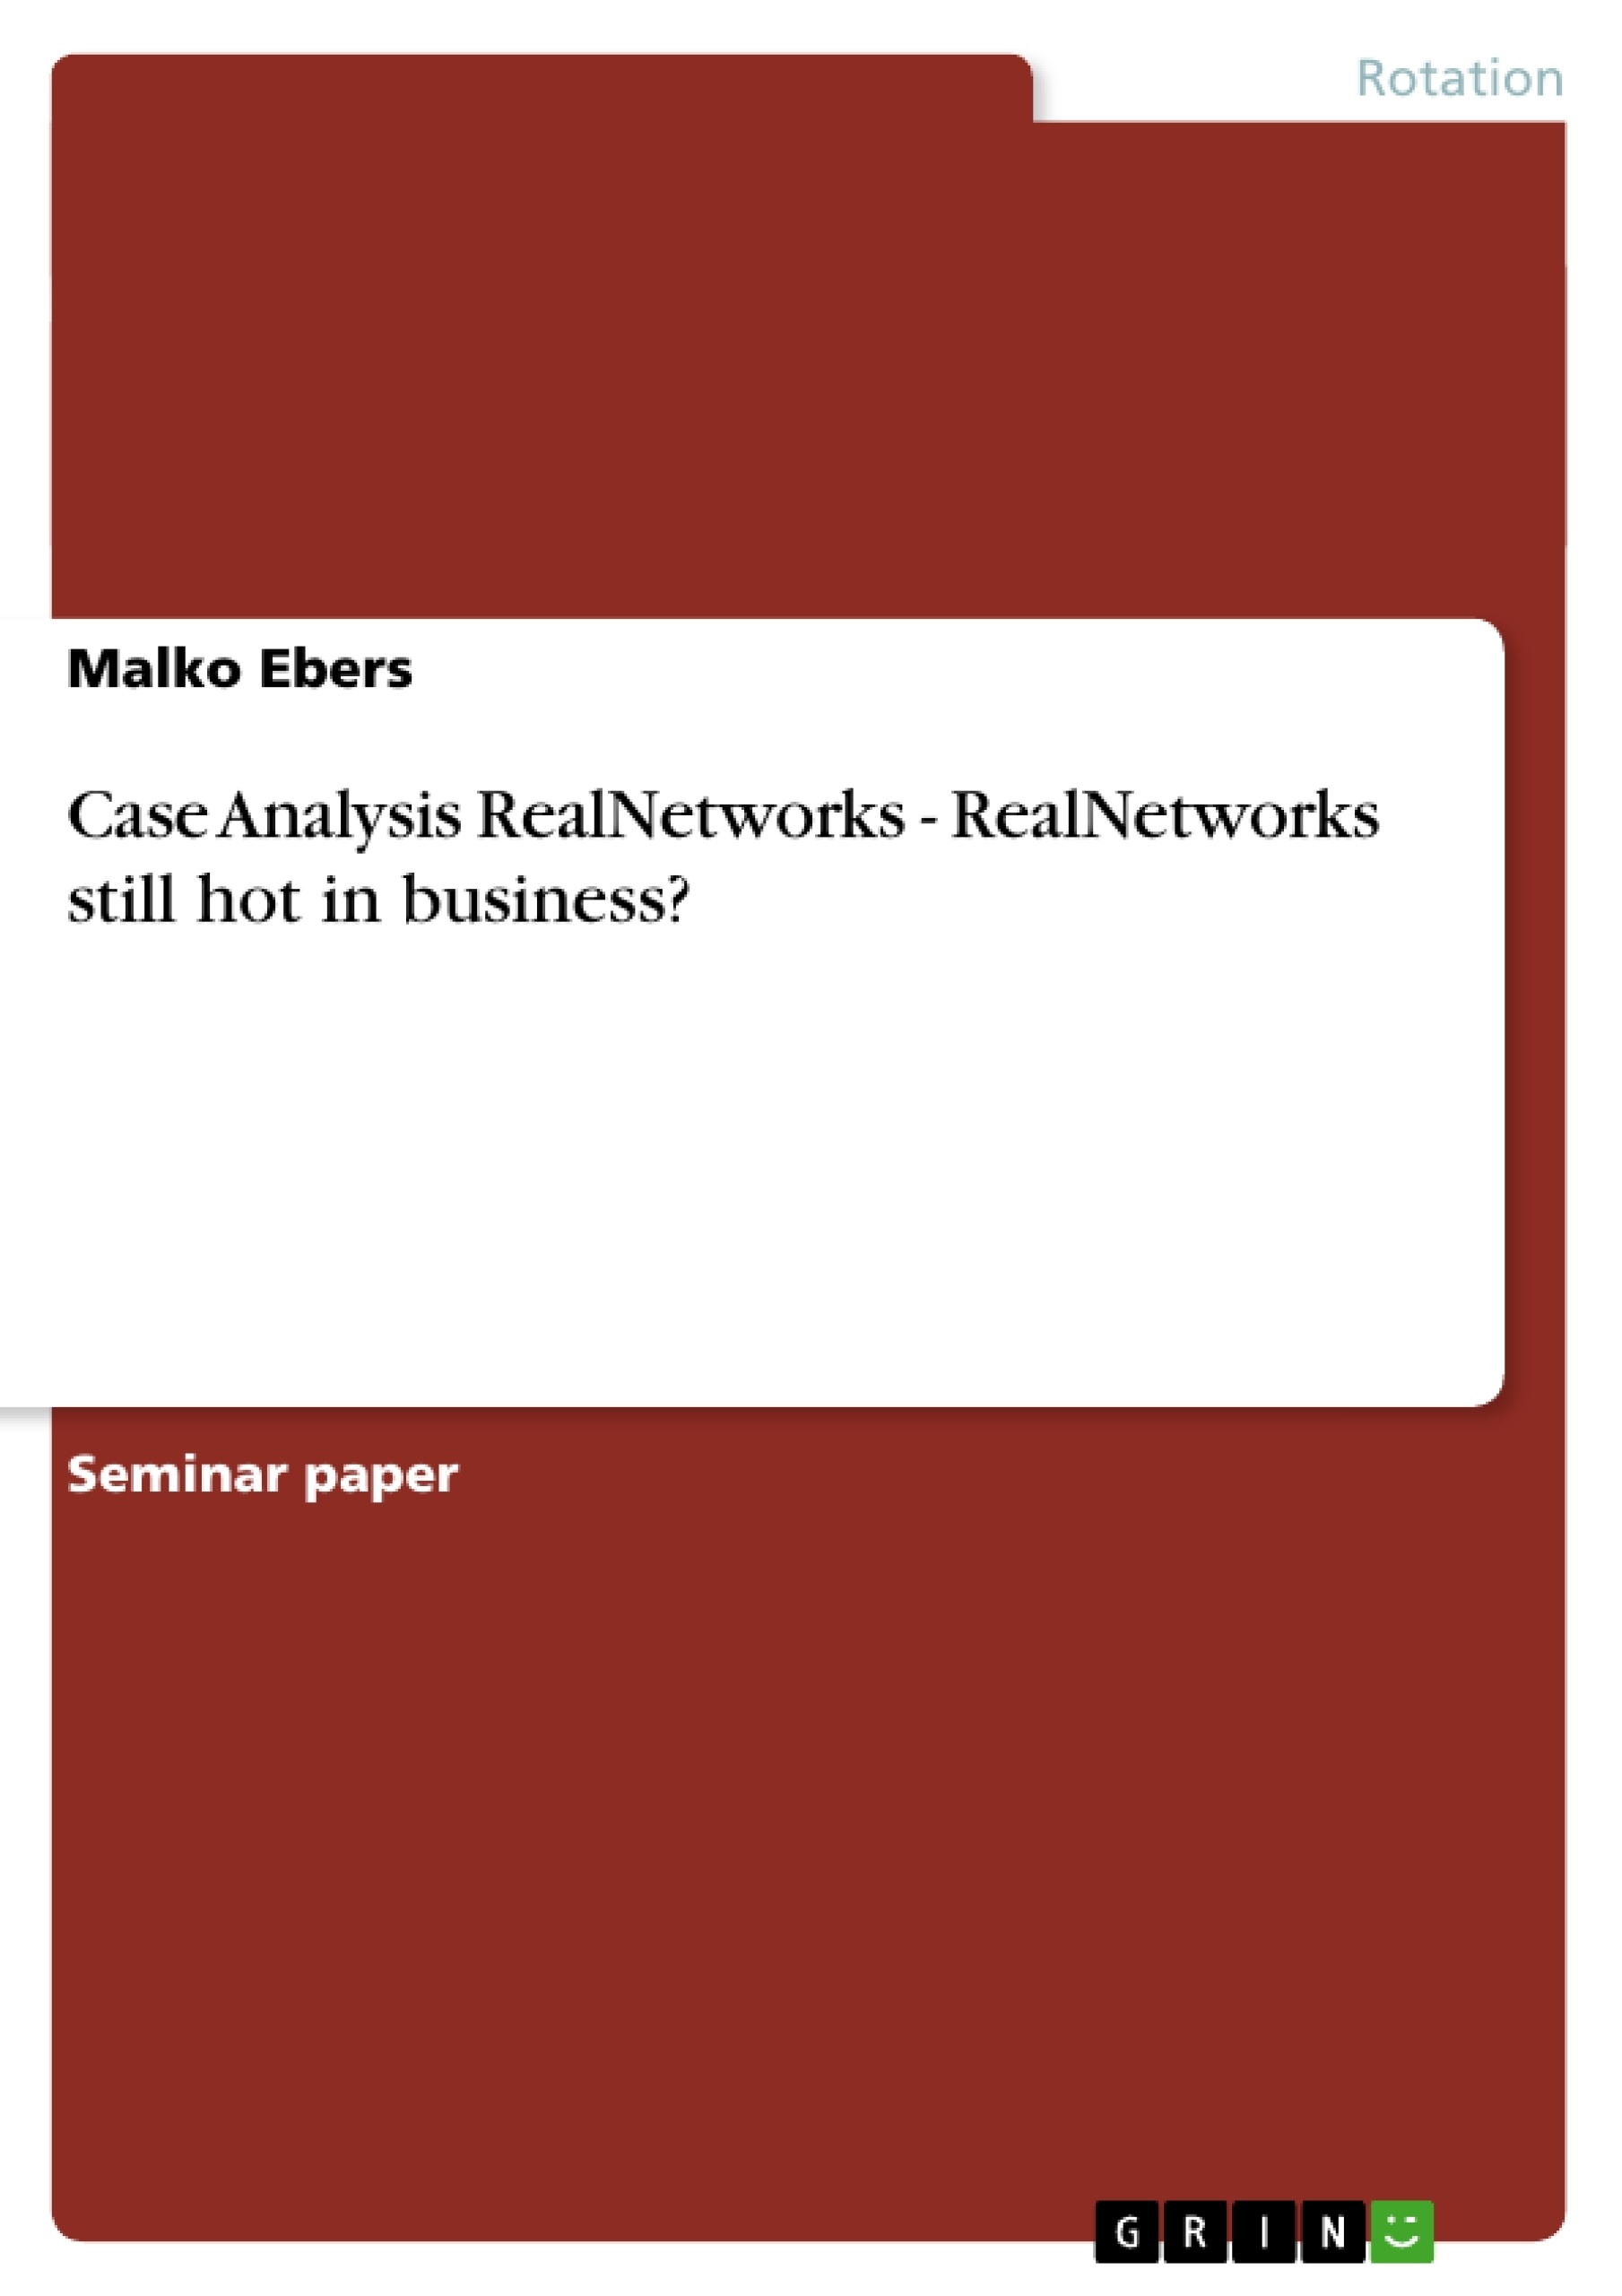 Title: Case Analysis RealNetworks - RealNetworks still hot in business?